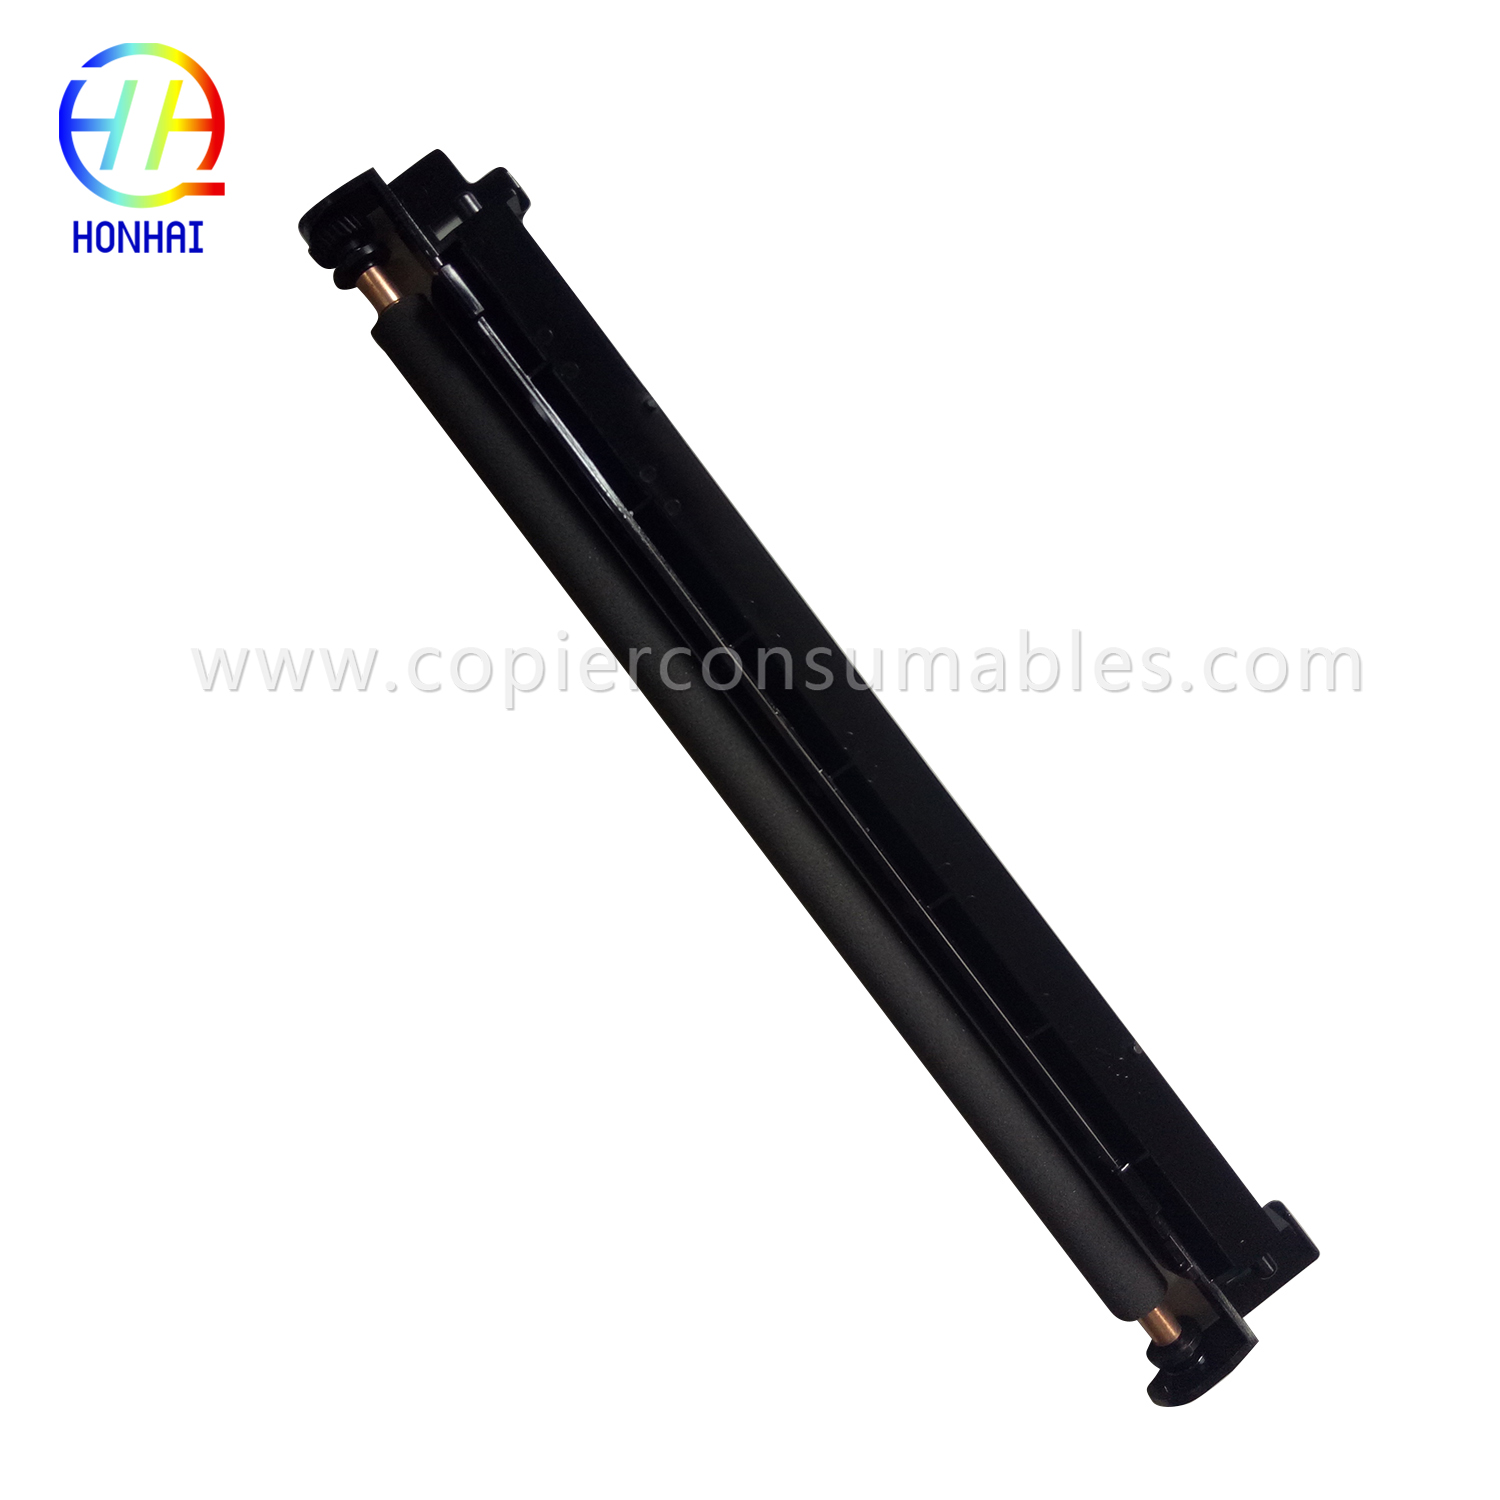 Transfer Roller Assembly for Ricoh Aficio 1022 1027 2022 2027 220 270 3025 3030 MP2510 2550 2852 (B2093831) (2)